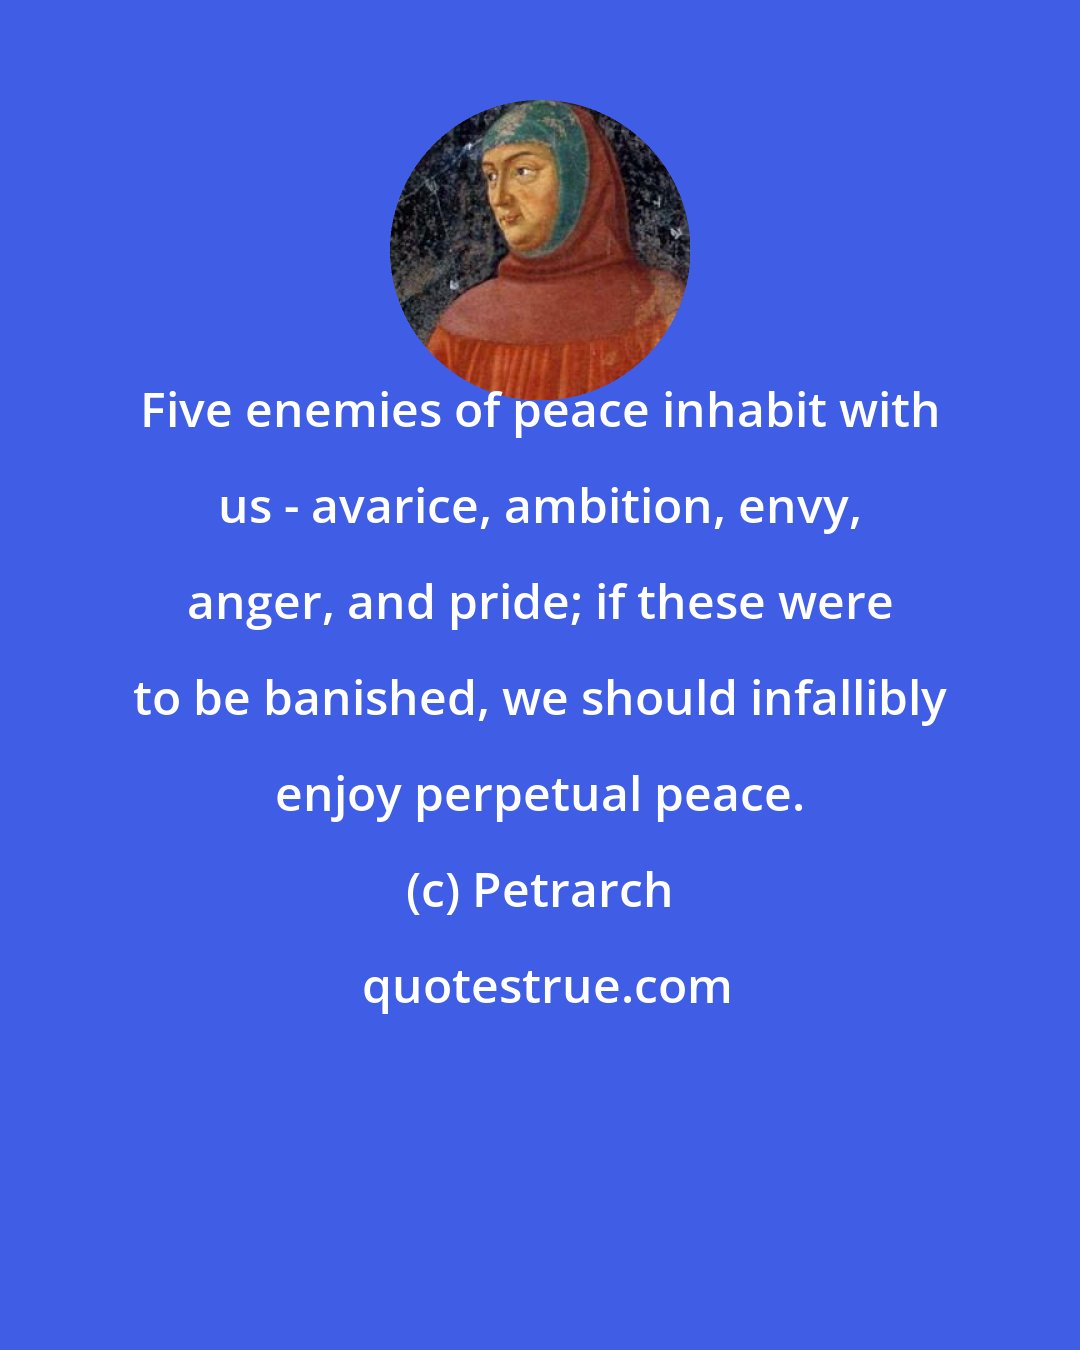 Petrarch: Five enemies of peace inhabit with us - avarice, ambition, envy, anger, and pride; if these were to be banished, we should infallibly enjoy perpetual peace.